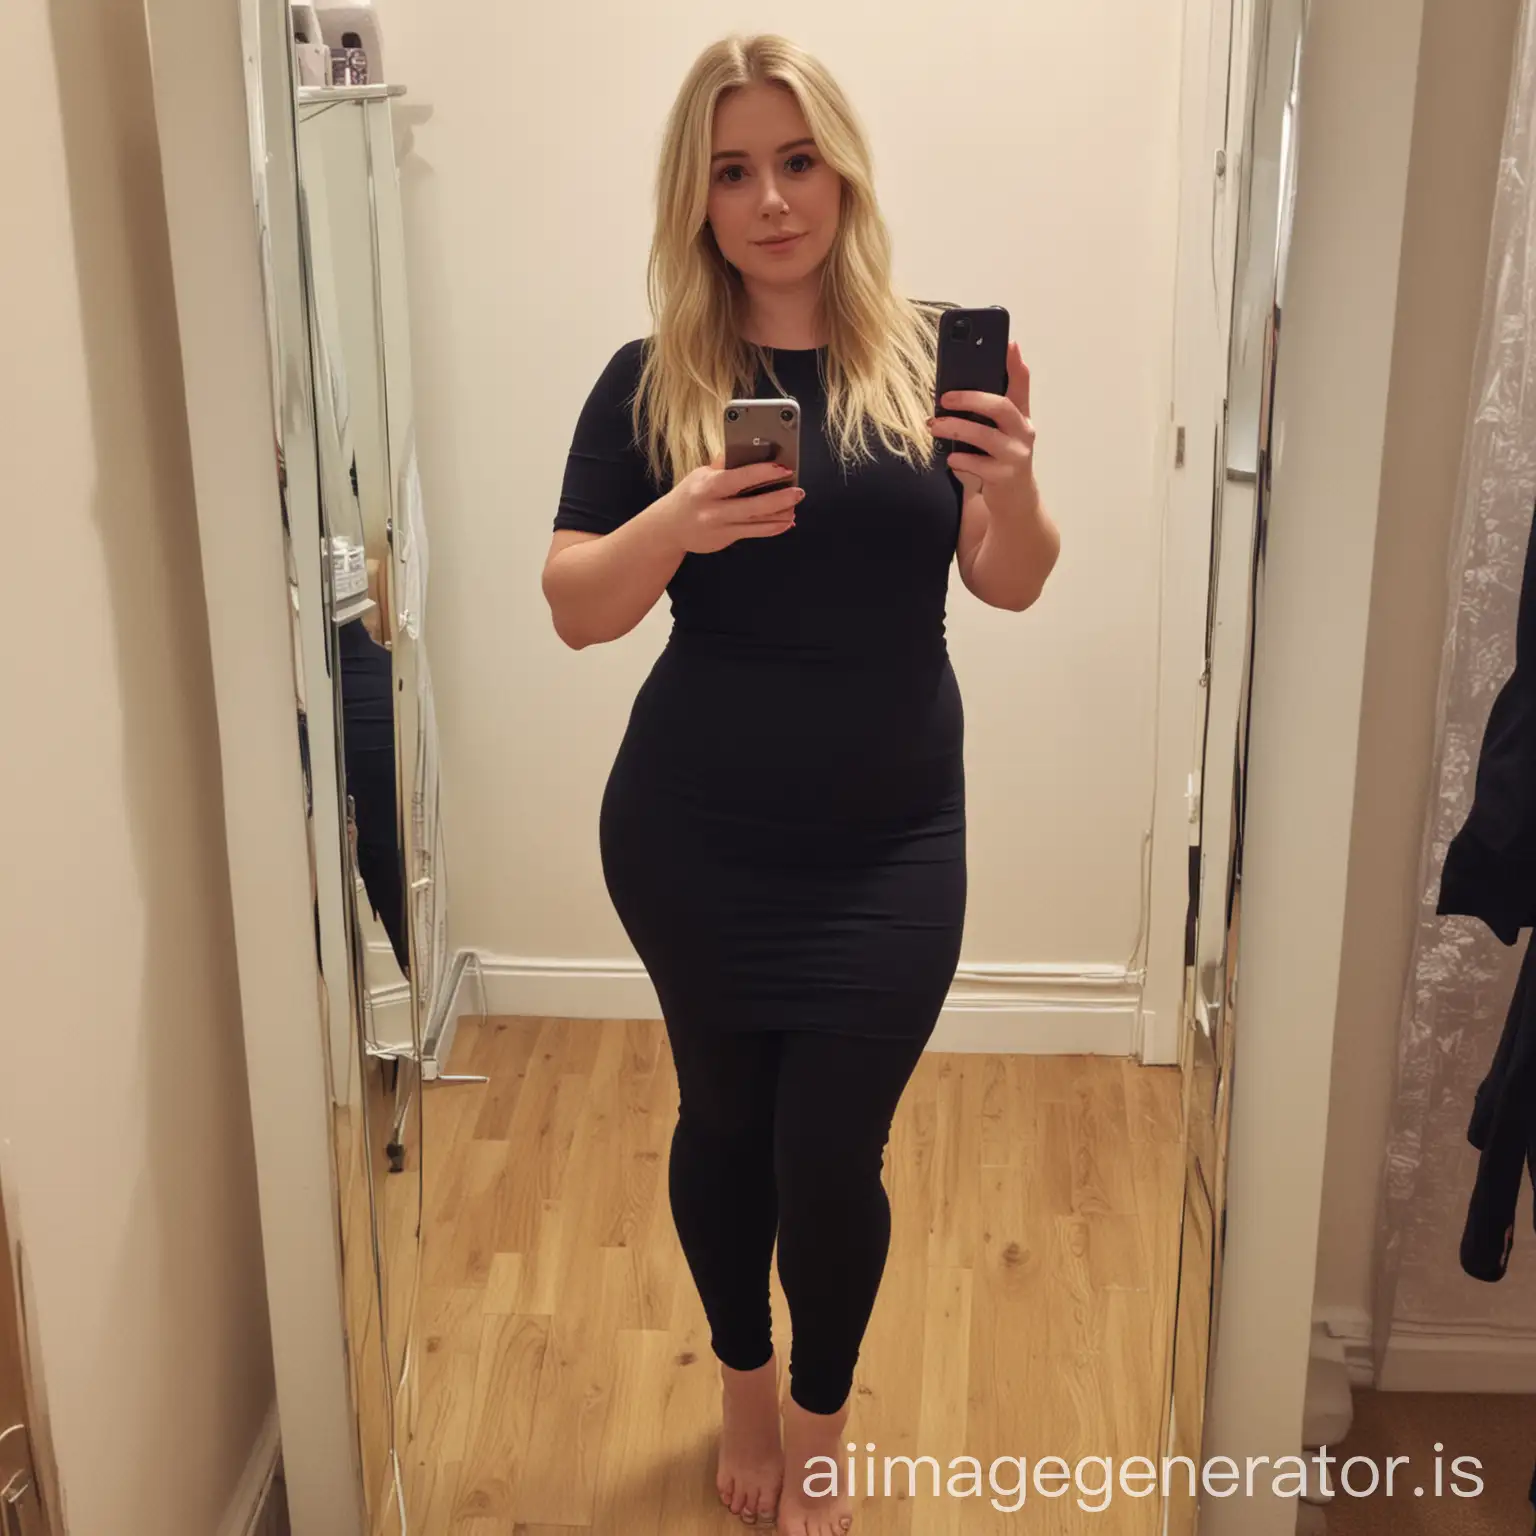 Overweight British woman blonde hair age 30 taking full length mirror selfie With clothes on alone